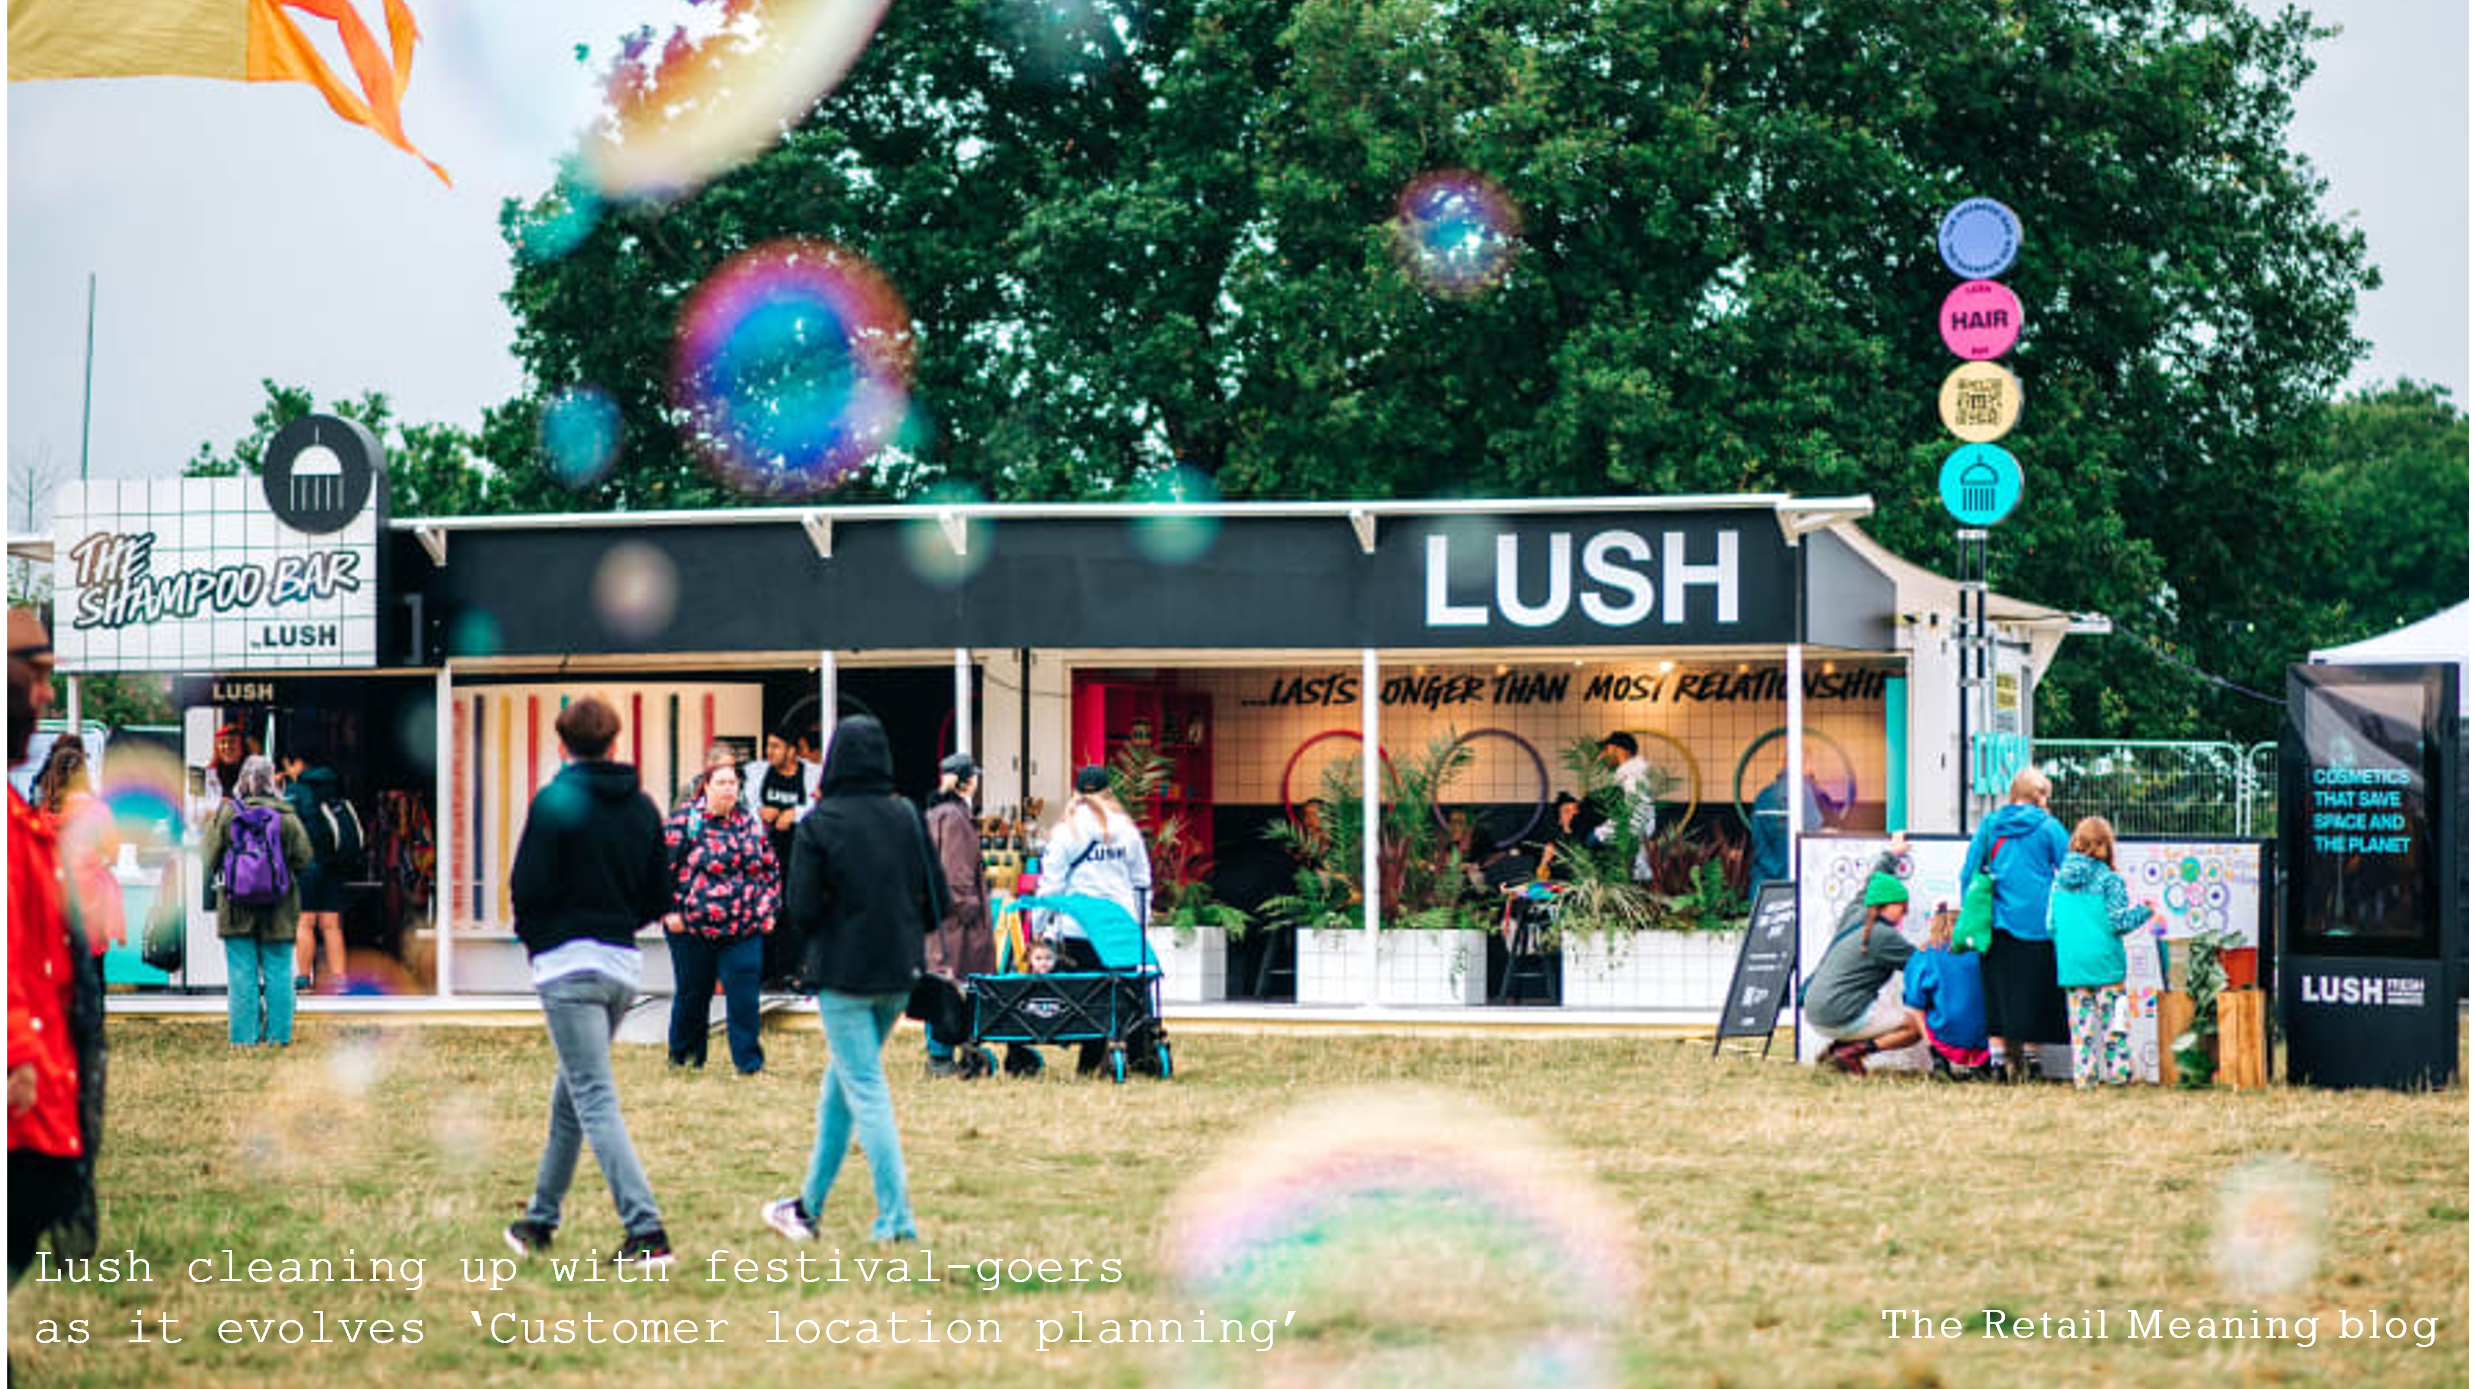 Lush cleaning up with festival-goers as it evolves ‘Customer location planning’